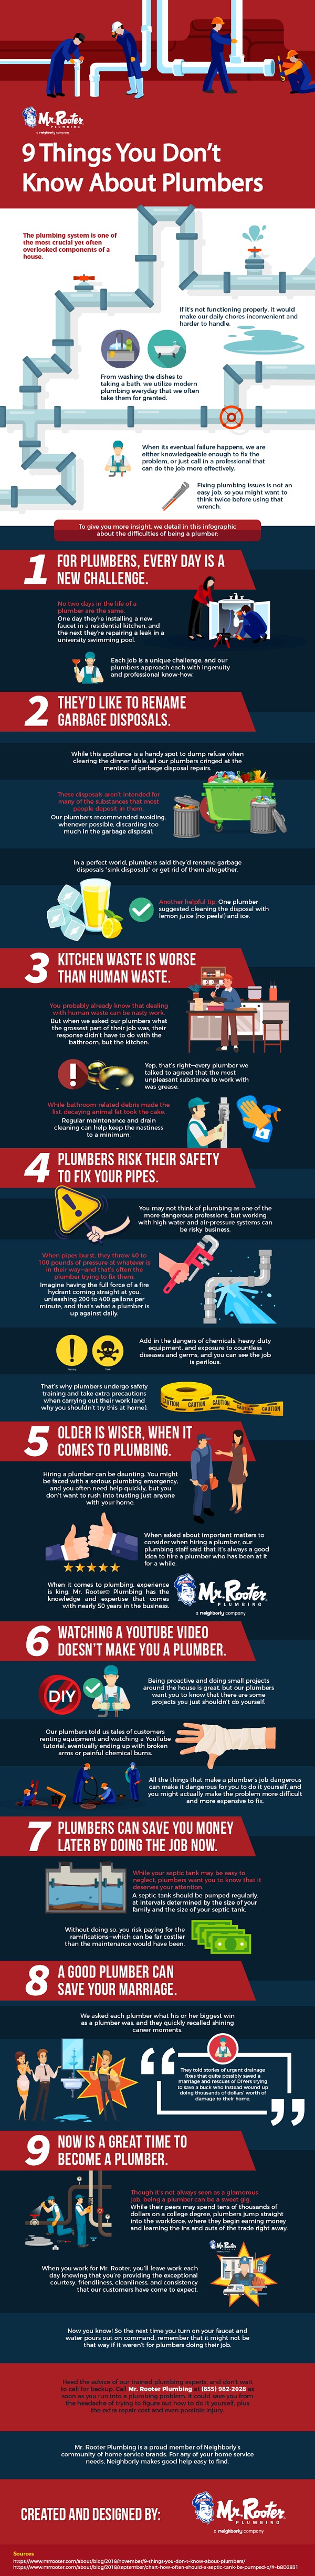 You Don’t Know About Plumbers